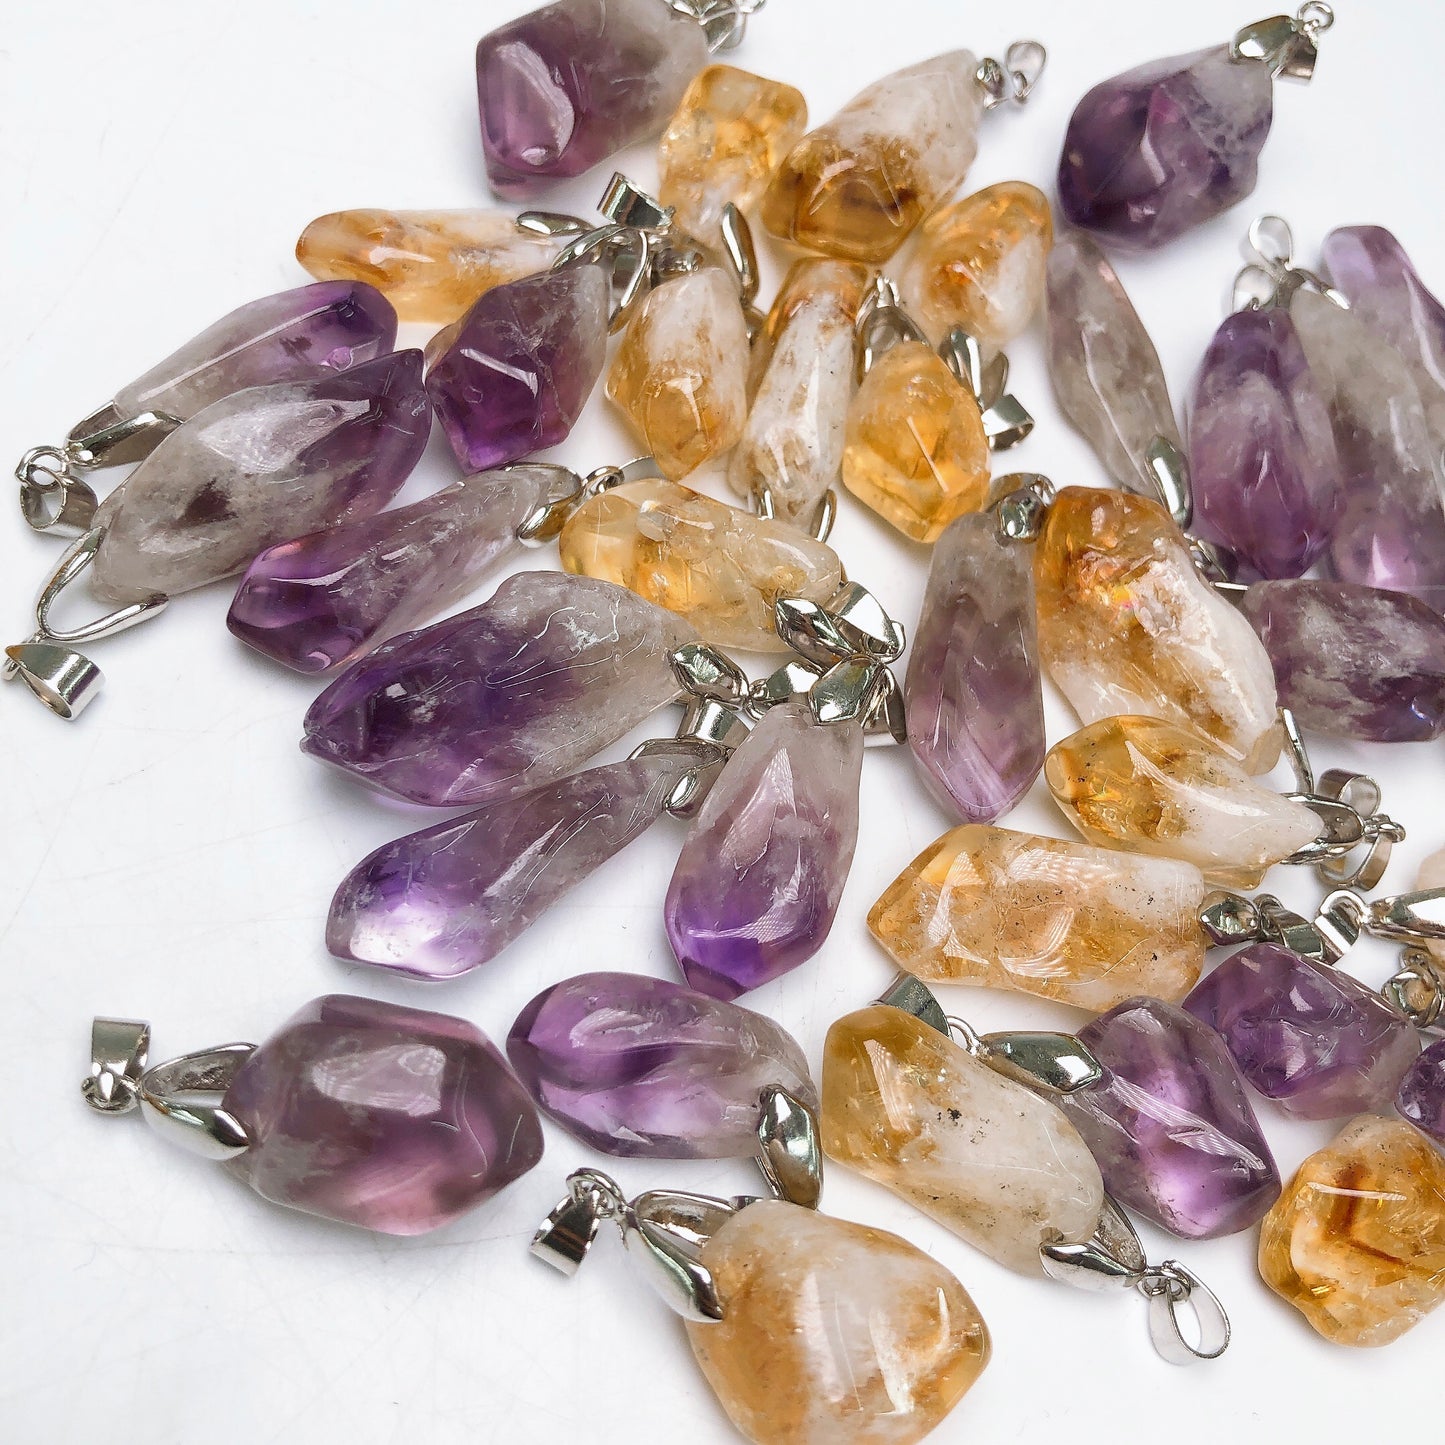 Amethyst pendant/Citrine pendant/Crystal healing/Free shipping over $200